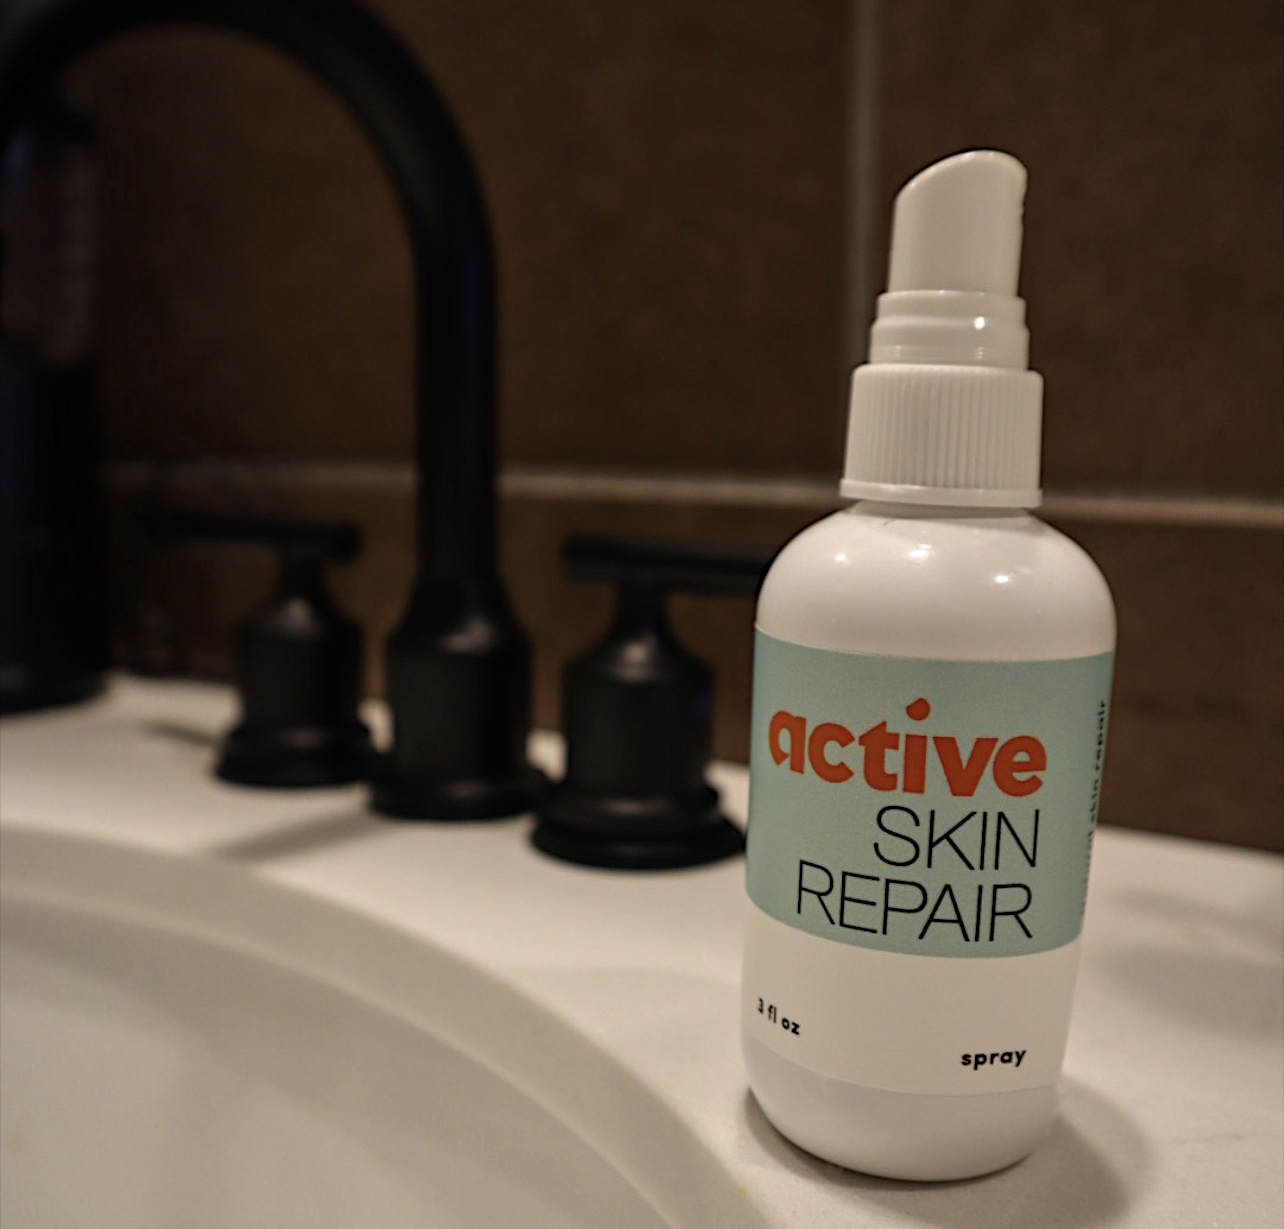 The One-Stop Solution for All Your Family’s Skin Irritations: BLDG Active Skin Repair Spray